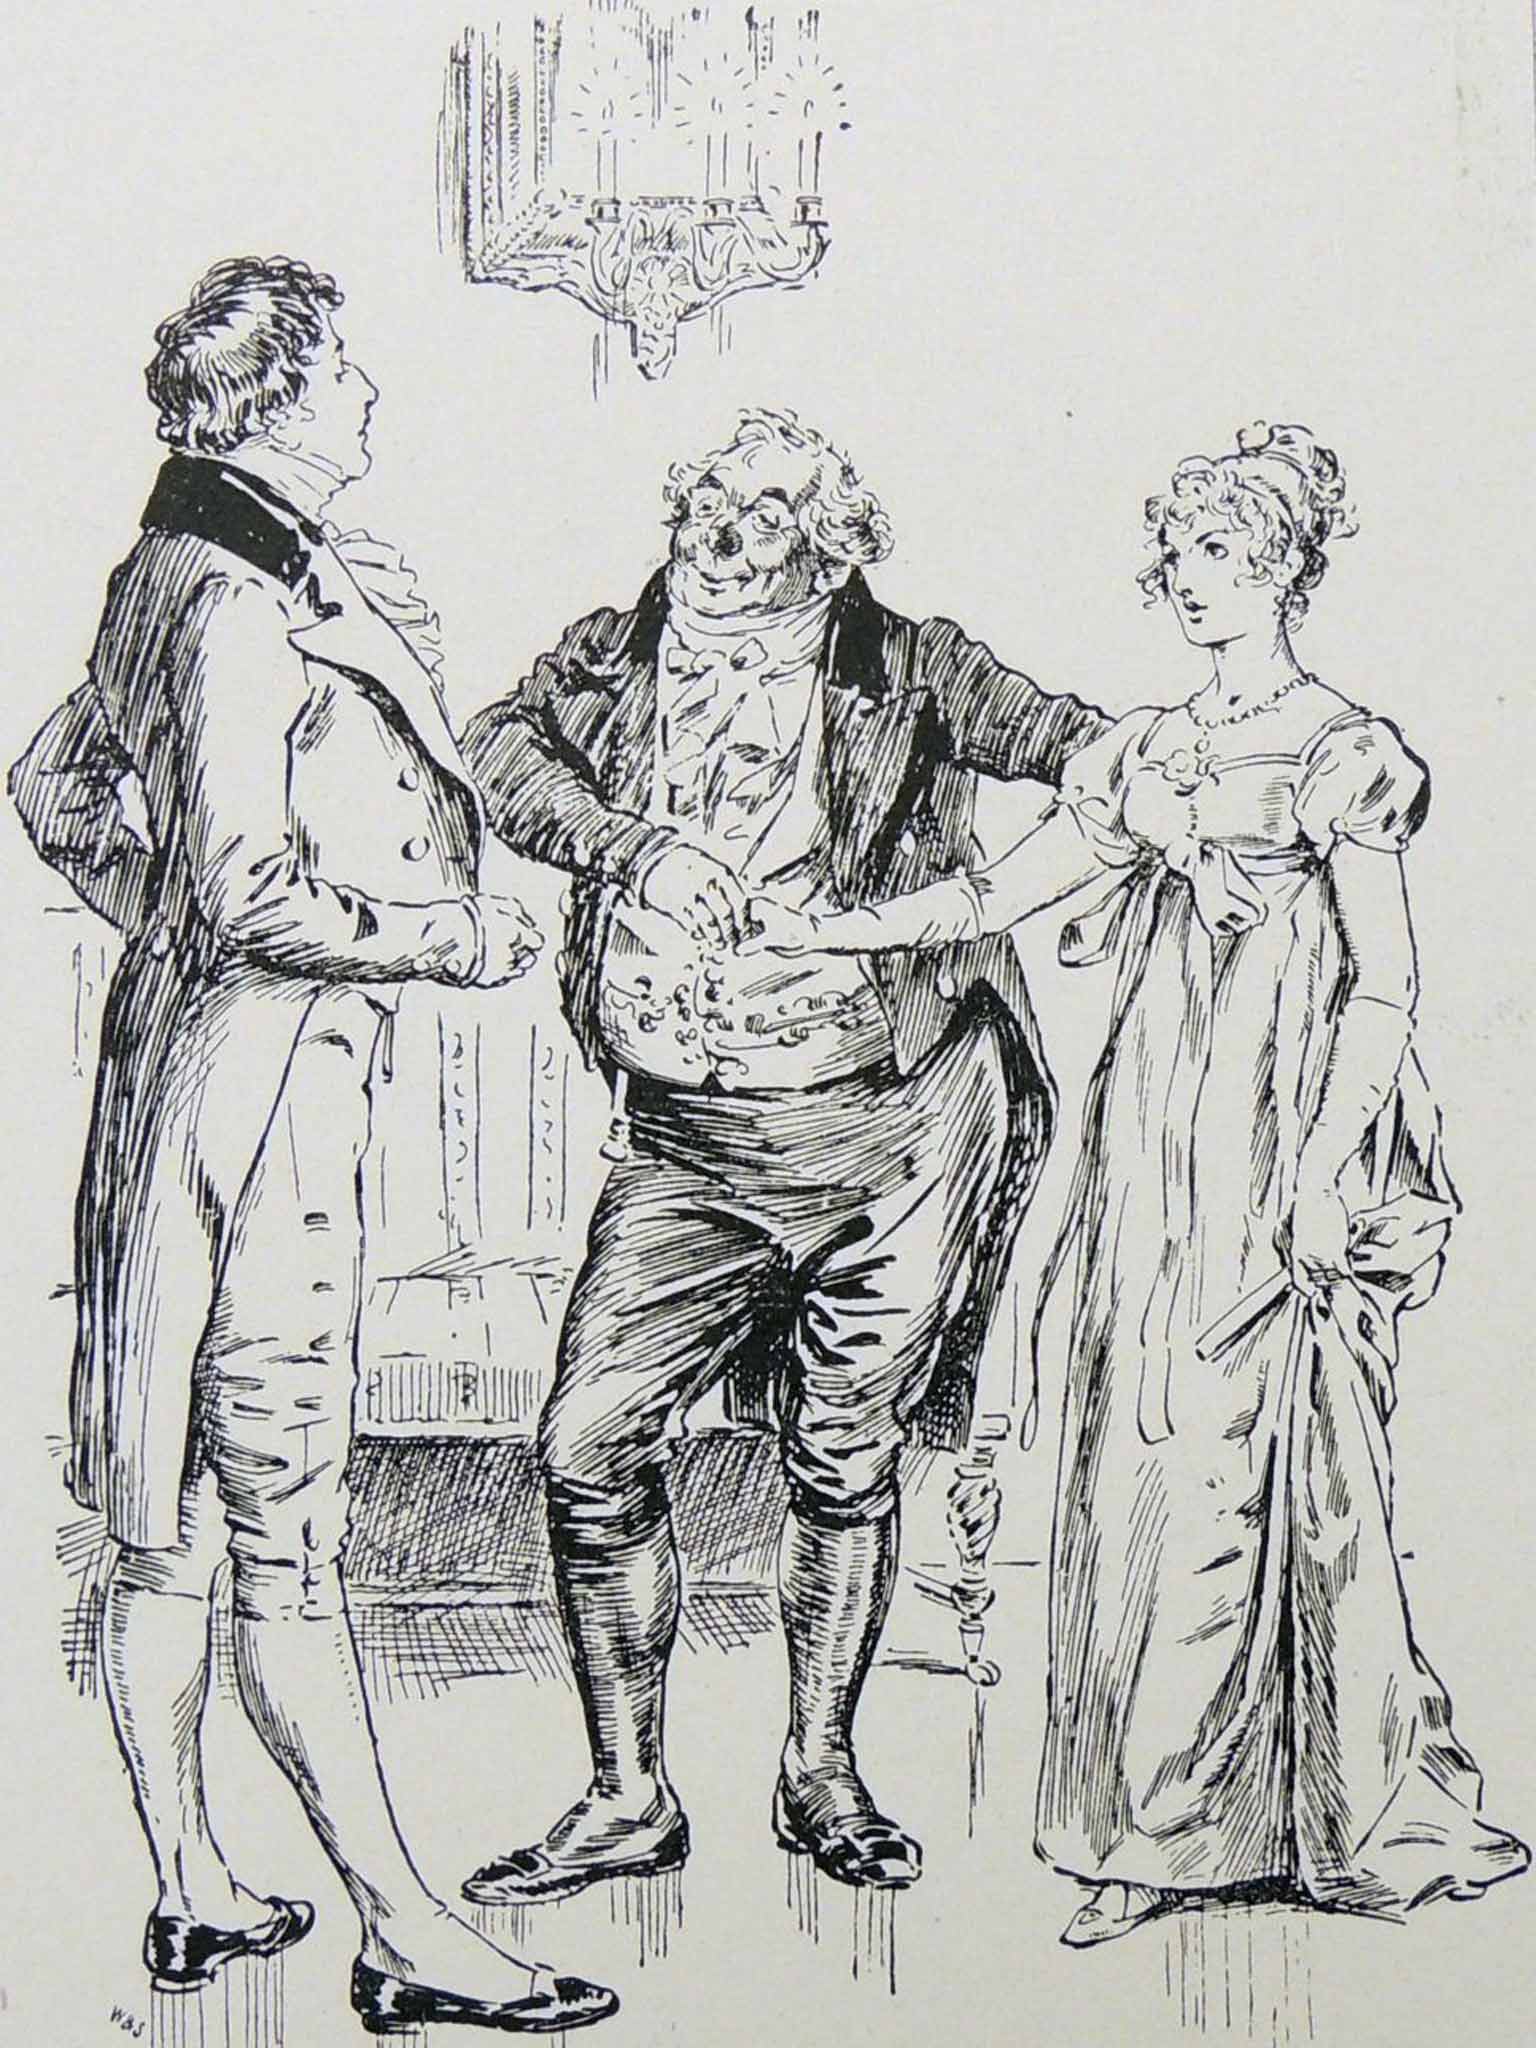 &#13;
Mr Darcy meets Elizabeth Bennet in an illustration by C. E. Brock for the 1895 edition of the book&#13;